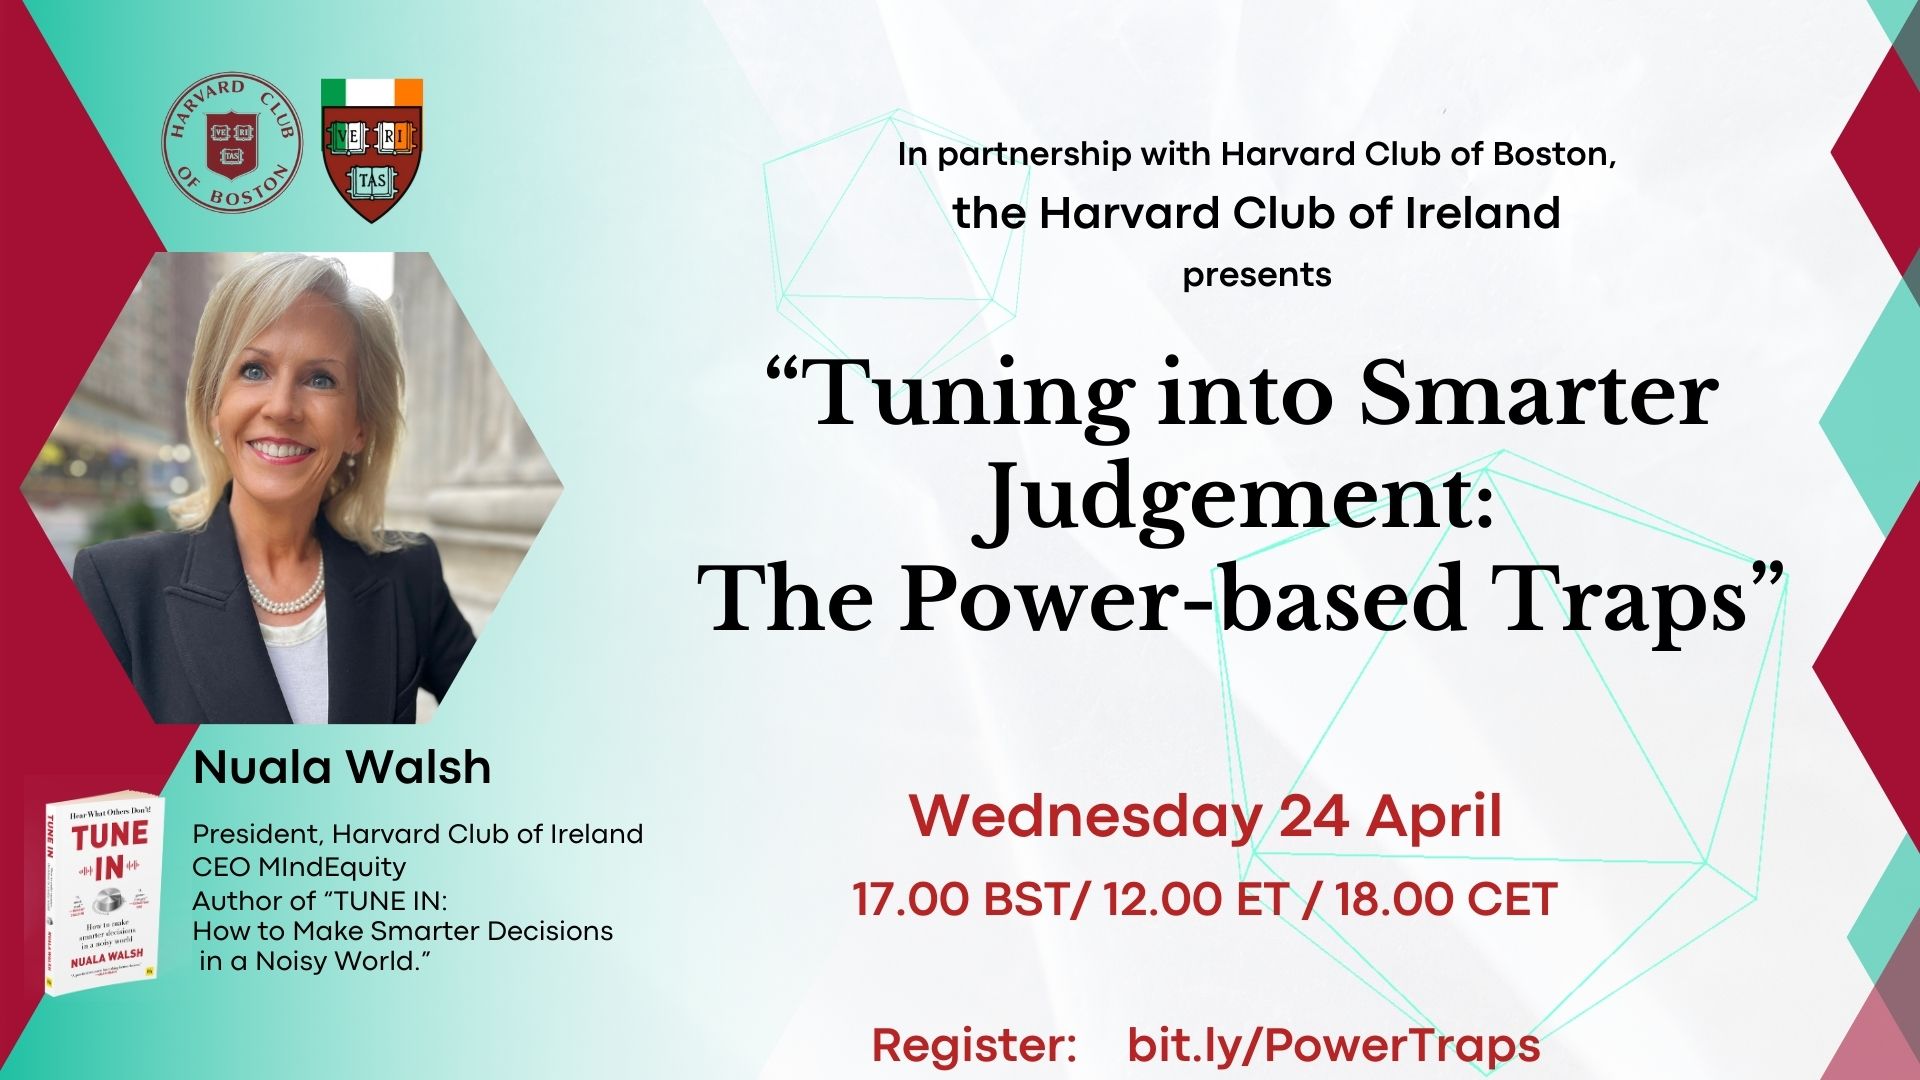 Nuala Walsh on Tuning Into Smarter Judgment: Power-based Judgment Traps